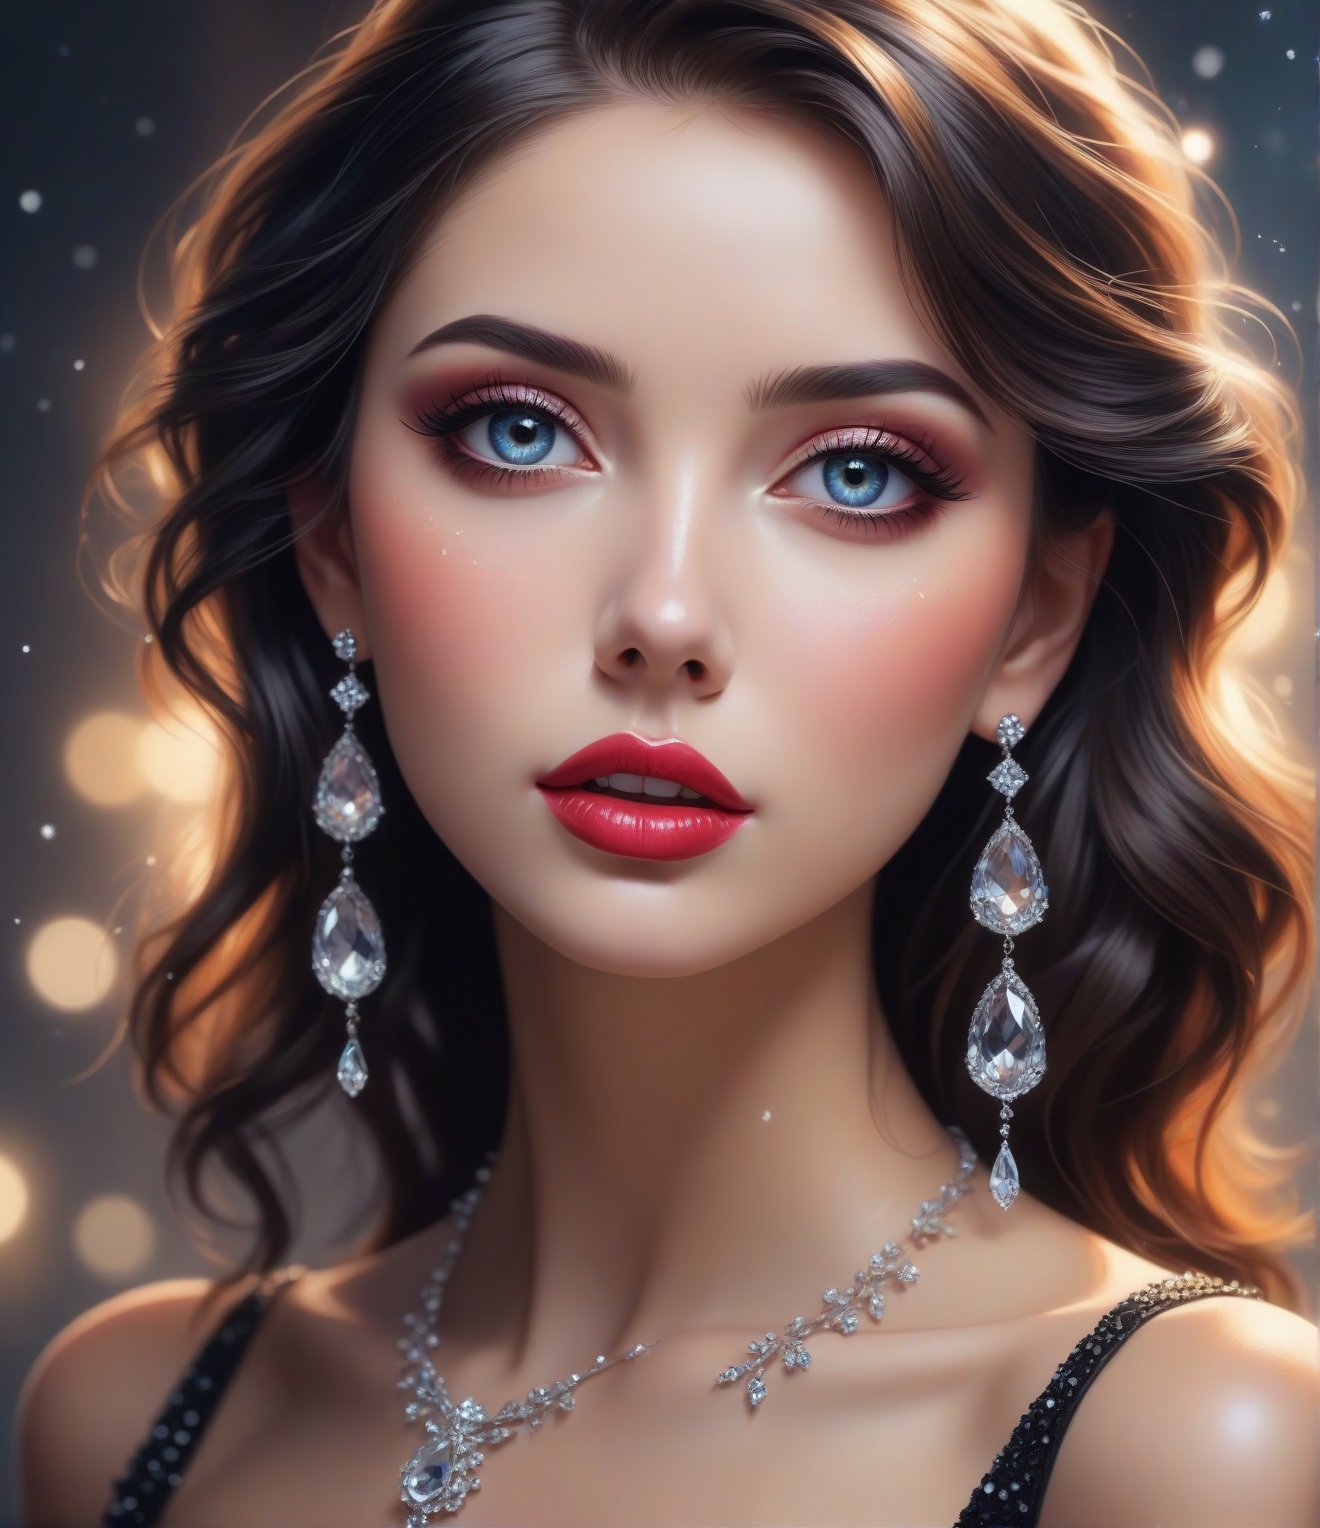 Masterpiece, 4K, ultra detailed, beautiful lady with glamorous makeup, beautiful bright eyes and  glossy lips, dangling crystal earrings, depth of field, SFW, dreamy background ,Ink art